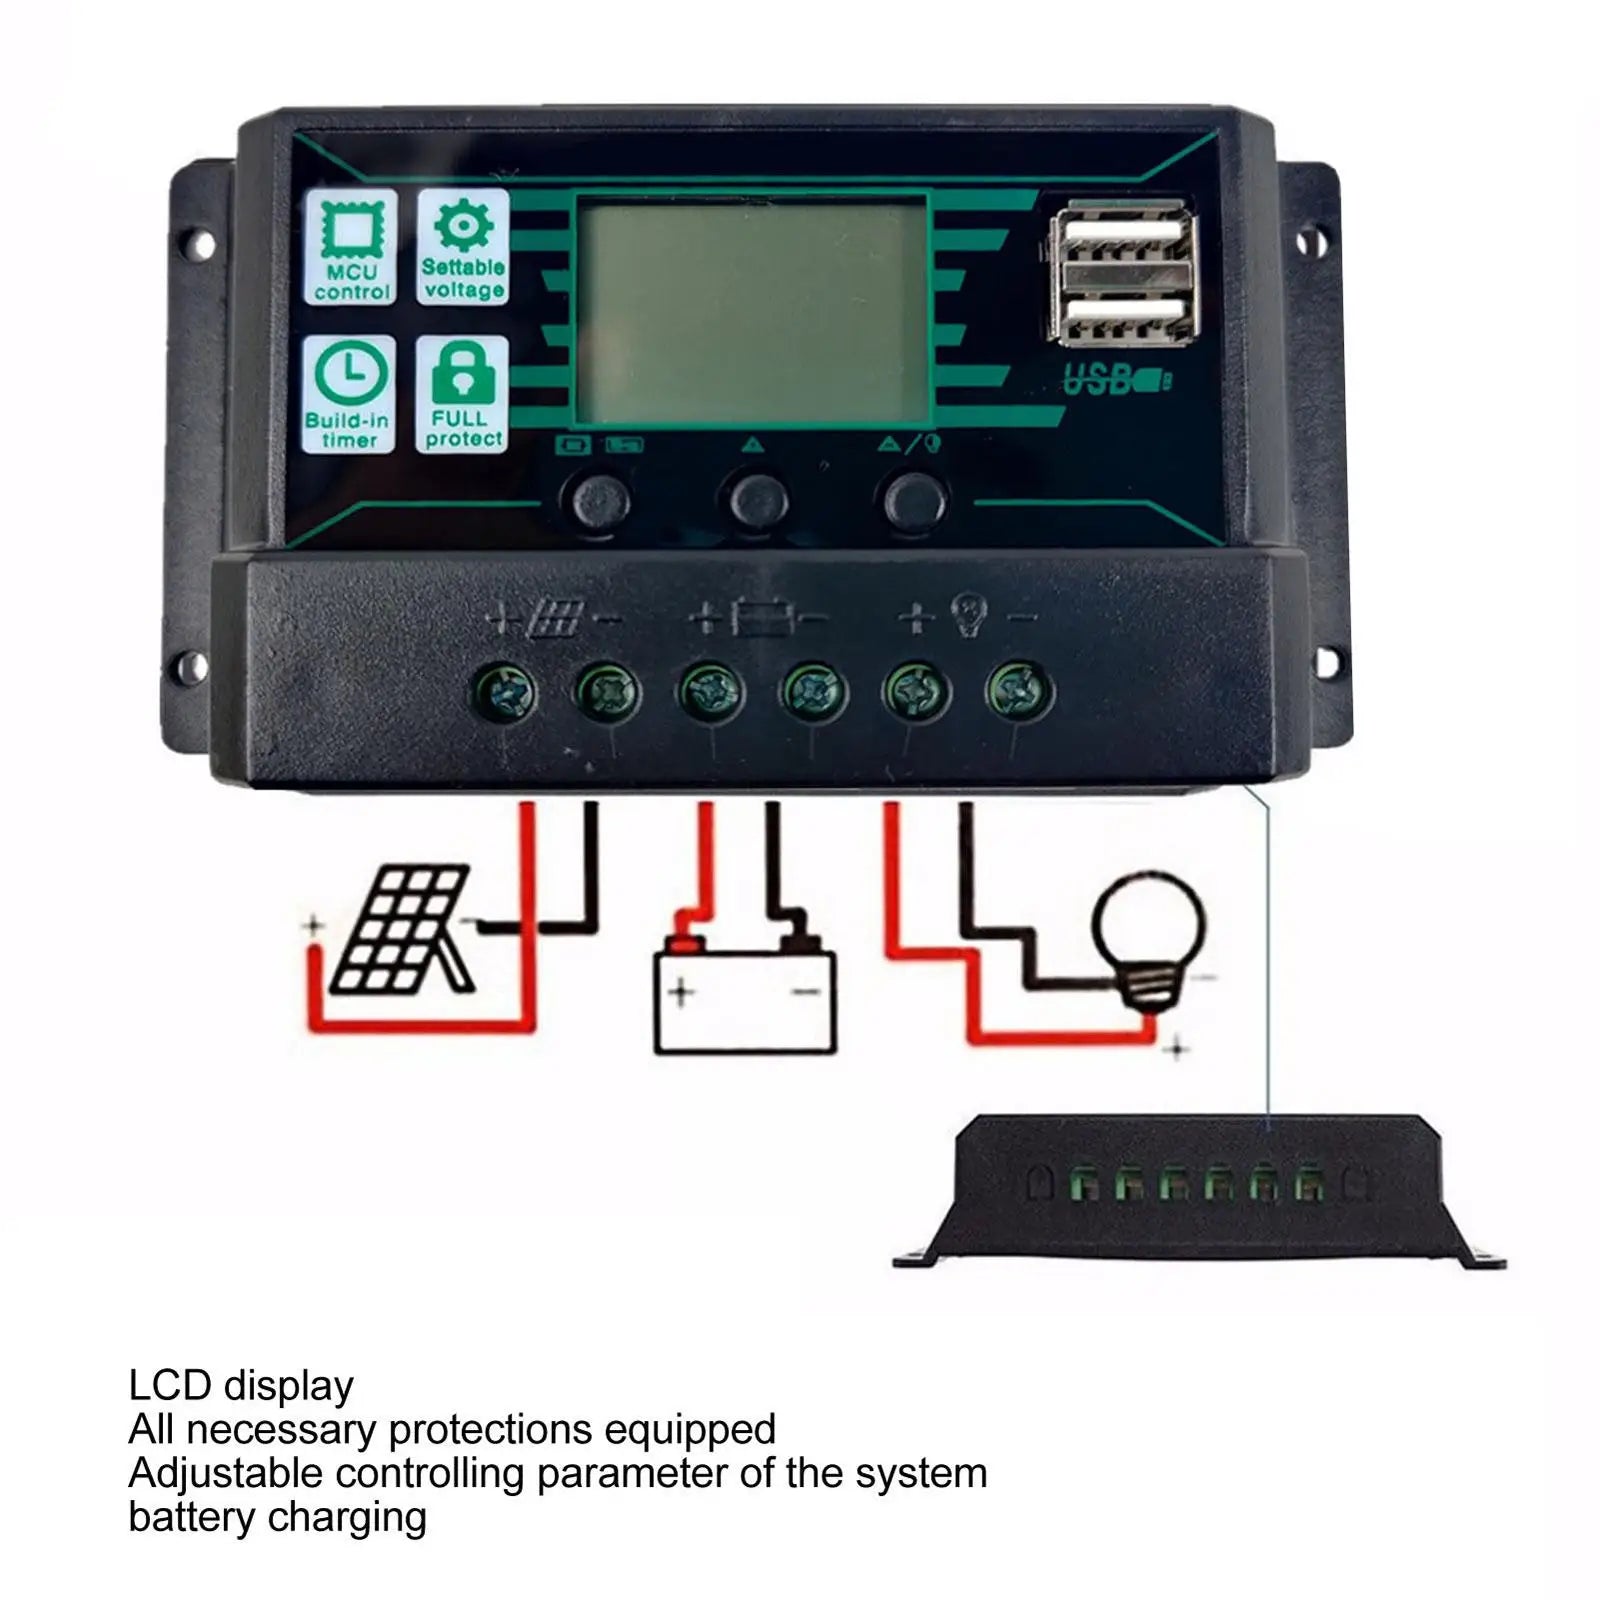 MPPT 10/20/30/60/100A Solar Charge Controller, Advanced solar charge controller with LCD display, adjustable settings, and full-time battery protection.